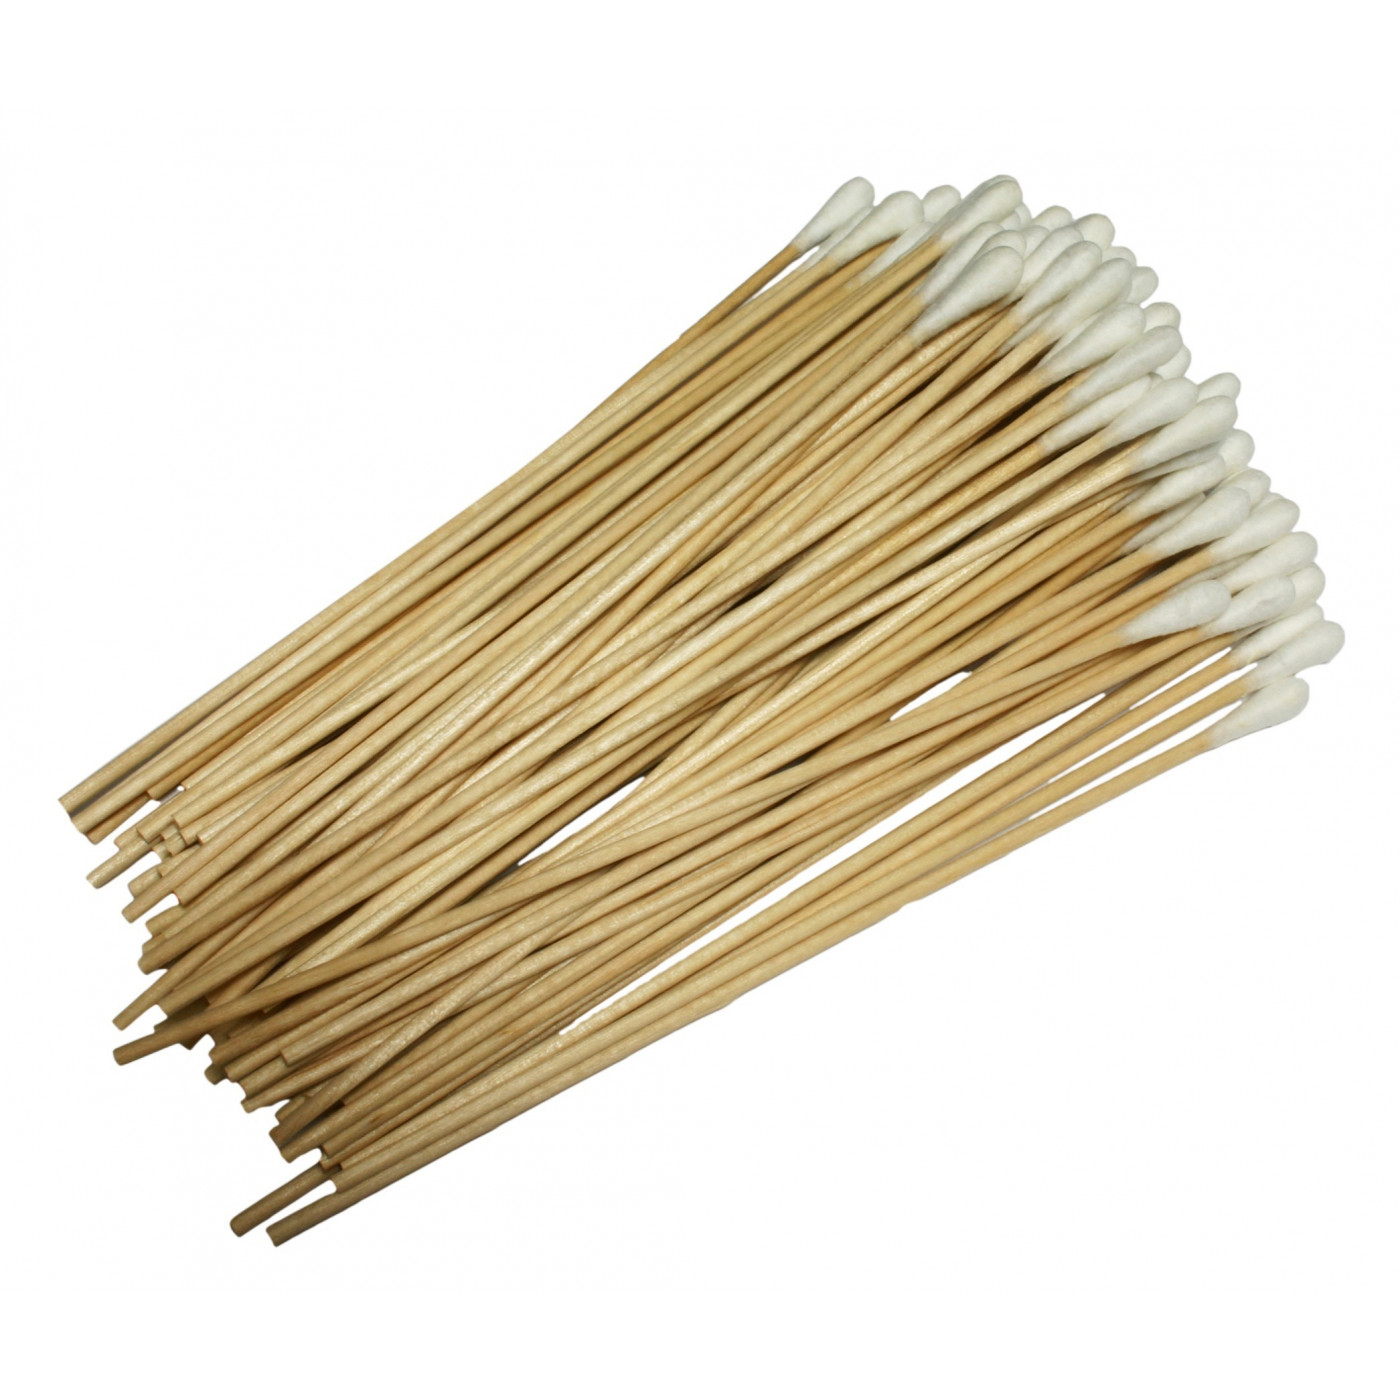 Set of 500 cotton swabs, extra long (15 cm)